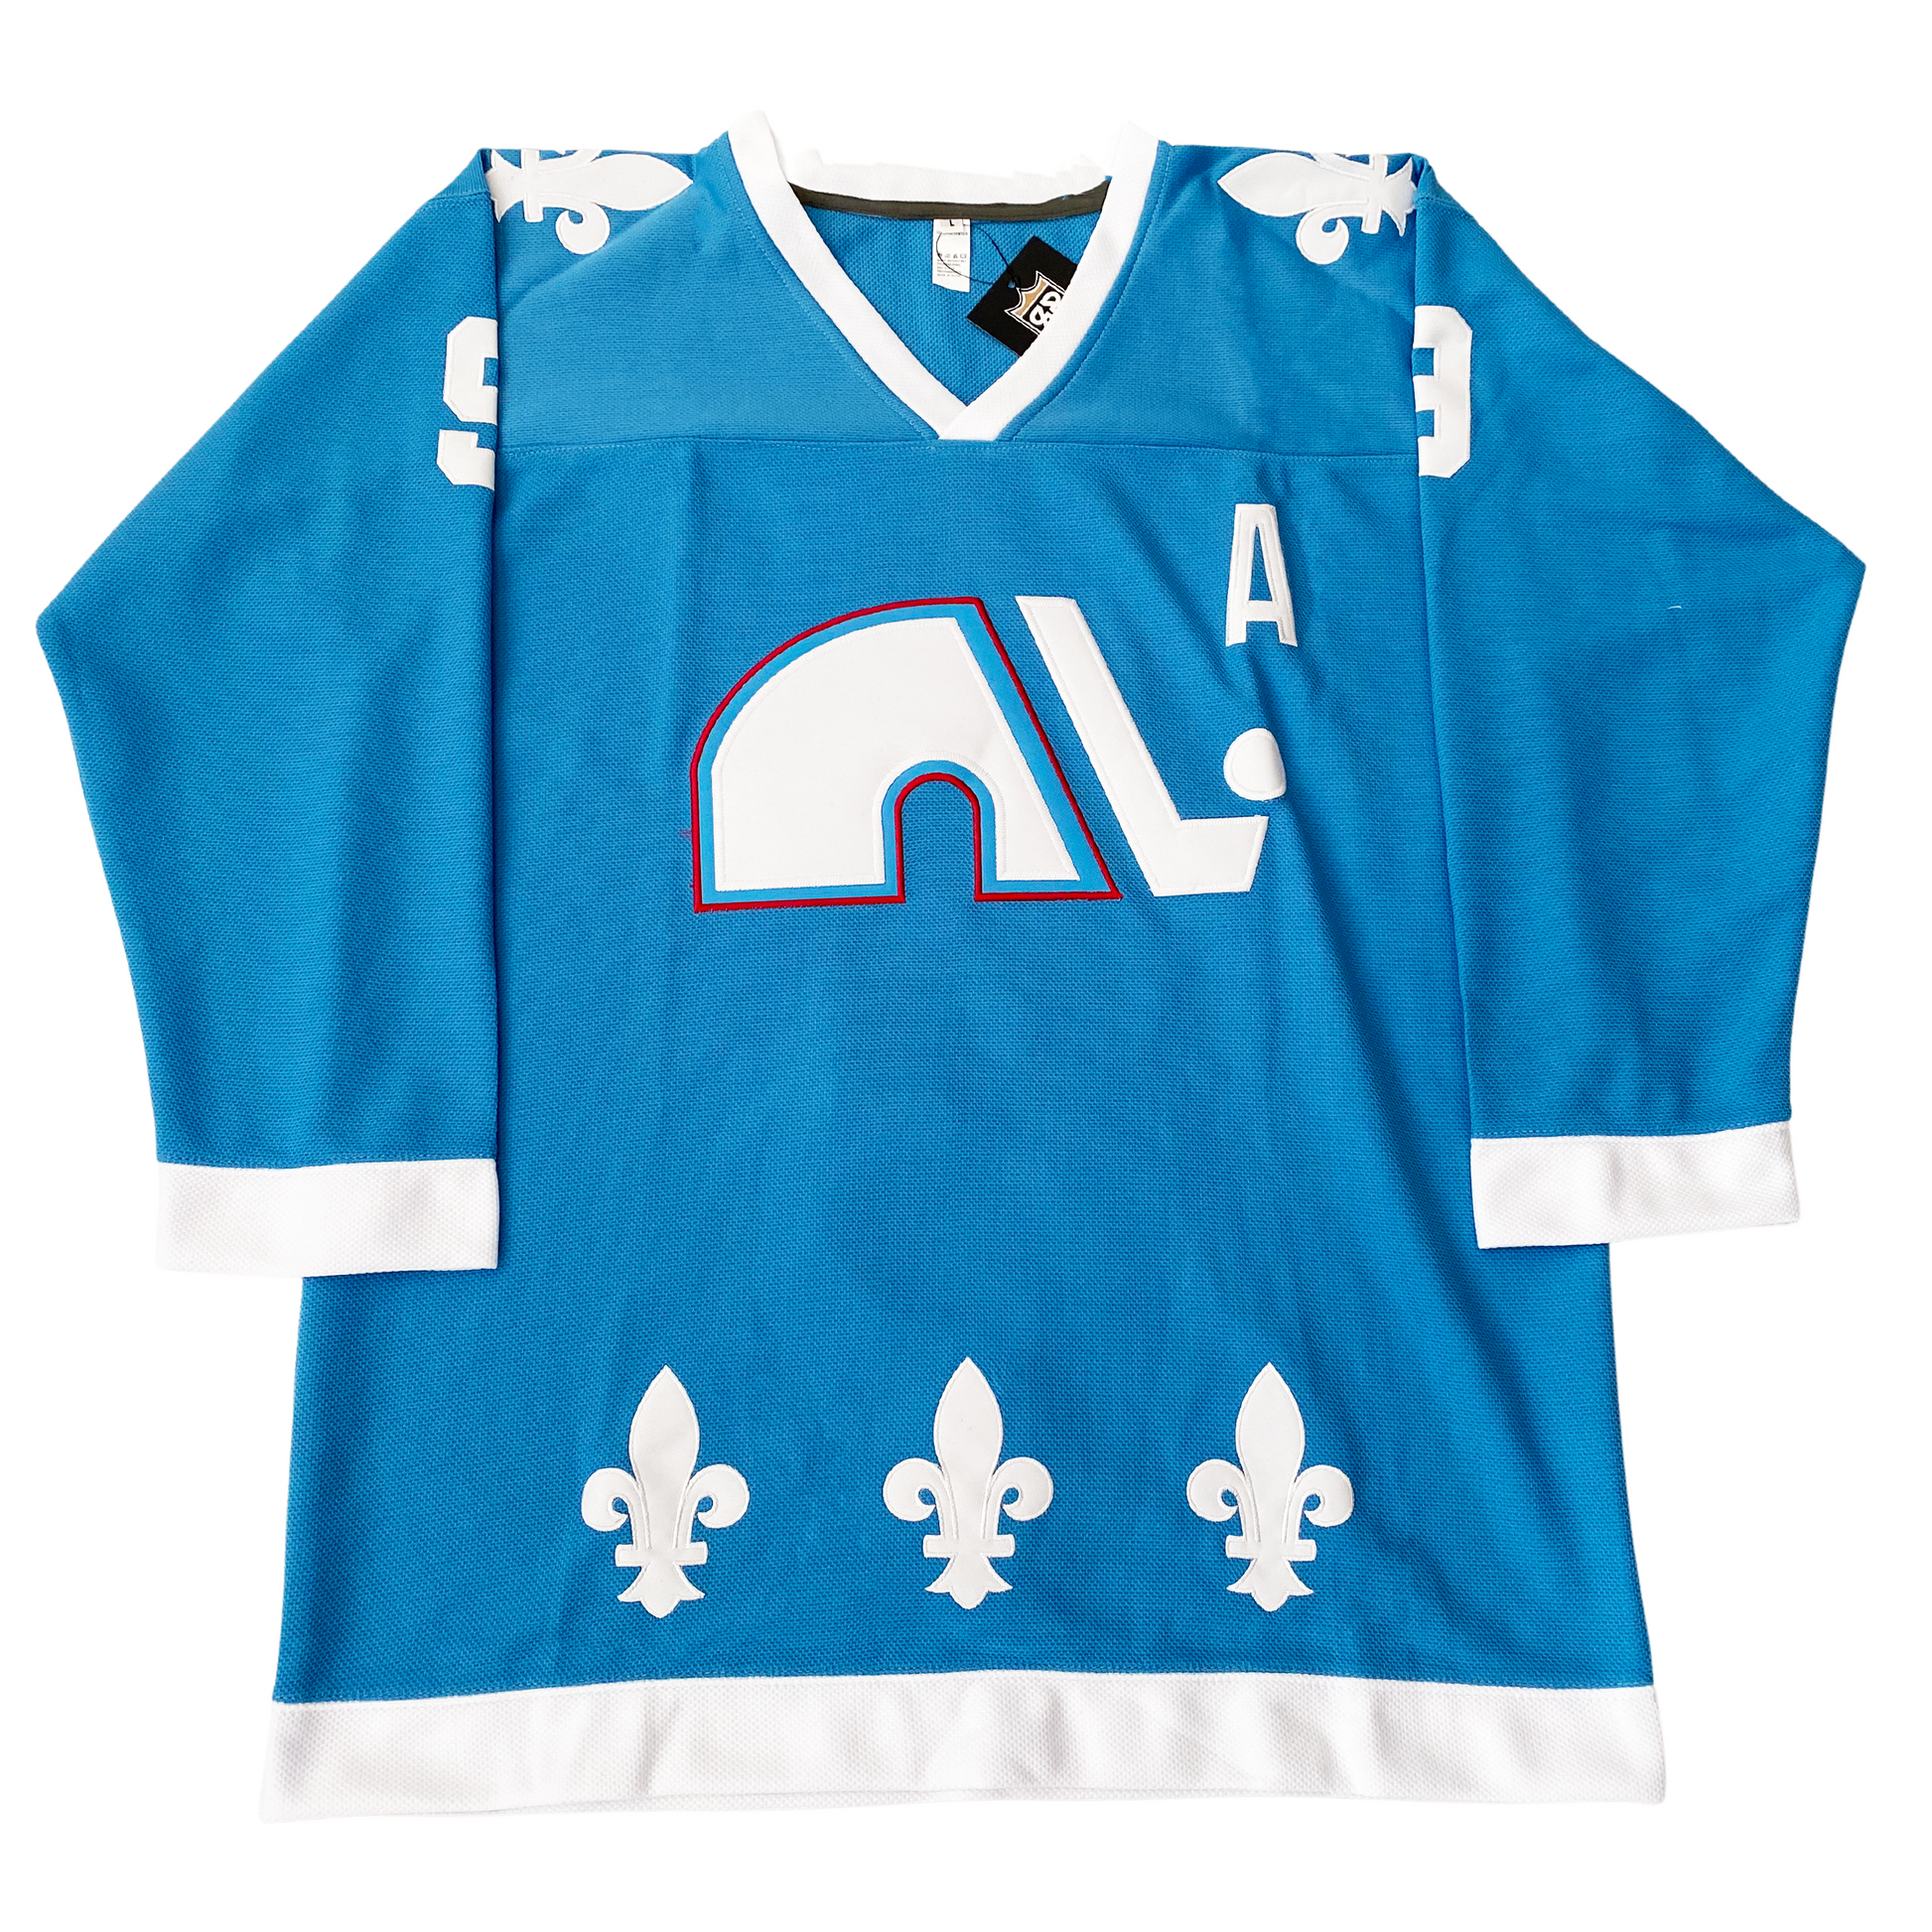 Peter Forsberg WHA Quebec Nordiques Hockey Jersey